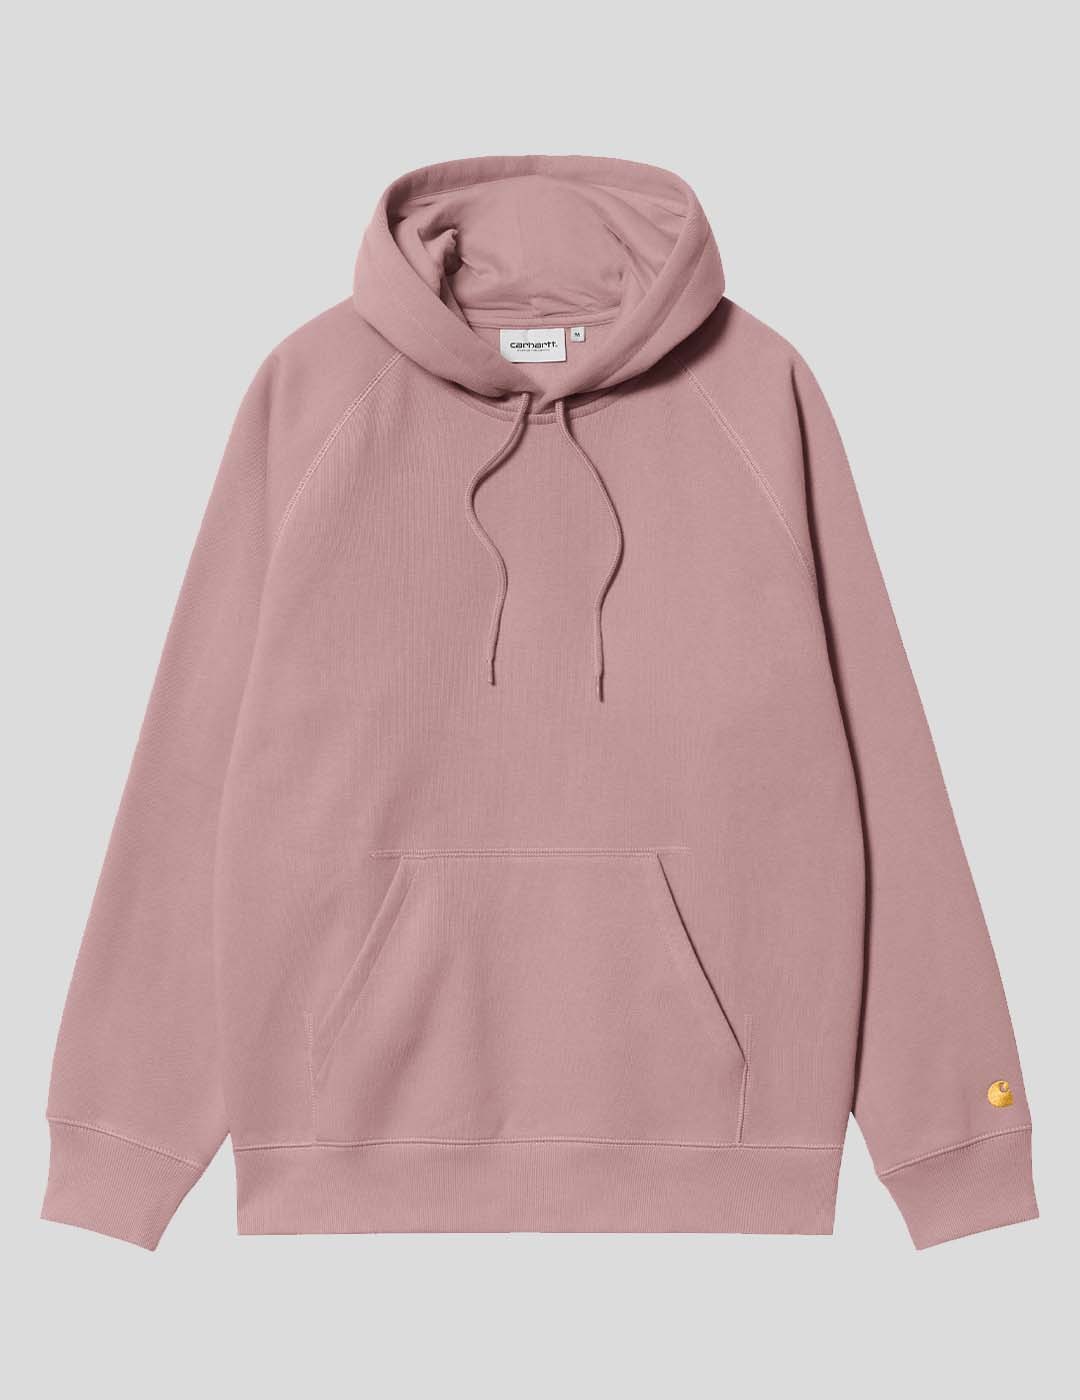 SUDADERA CARHARTT WIP  HOODED CHASE SWEAT  GLASSY PINK/GOLD